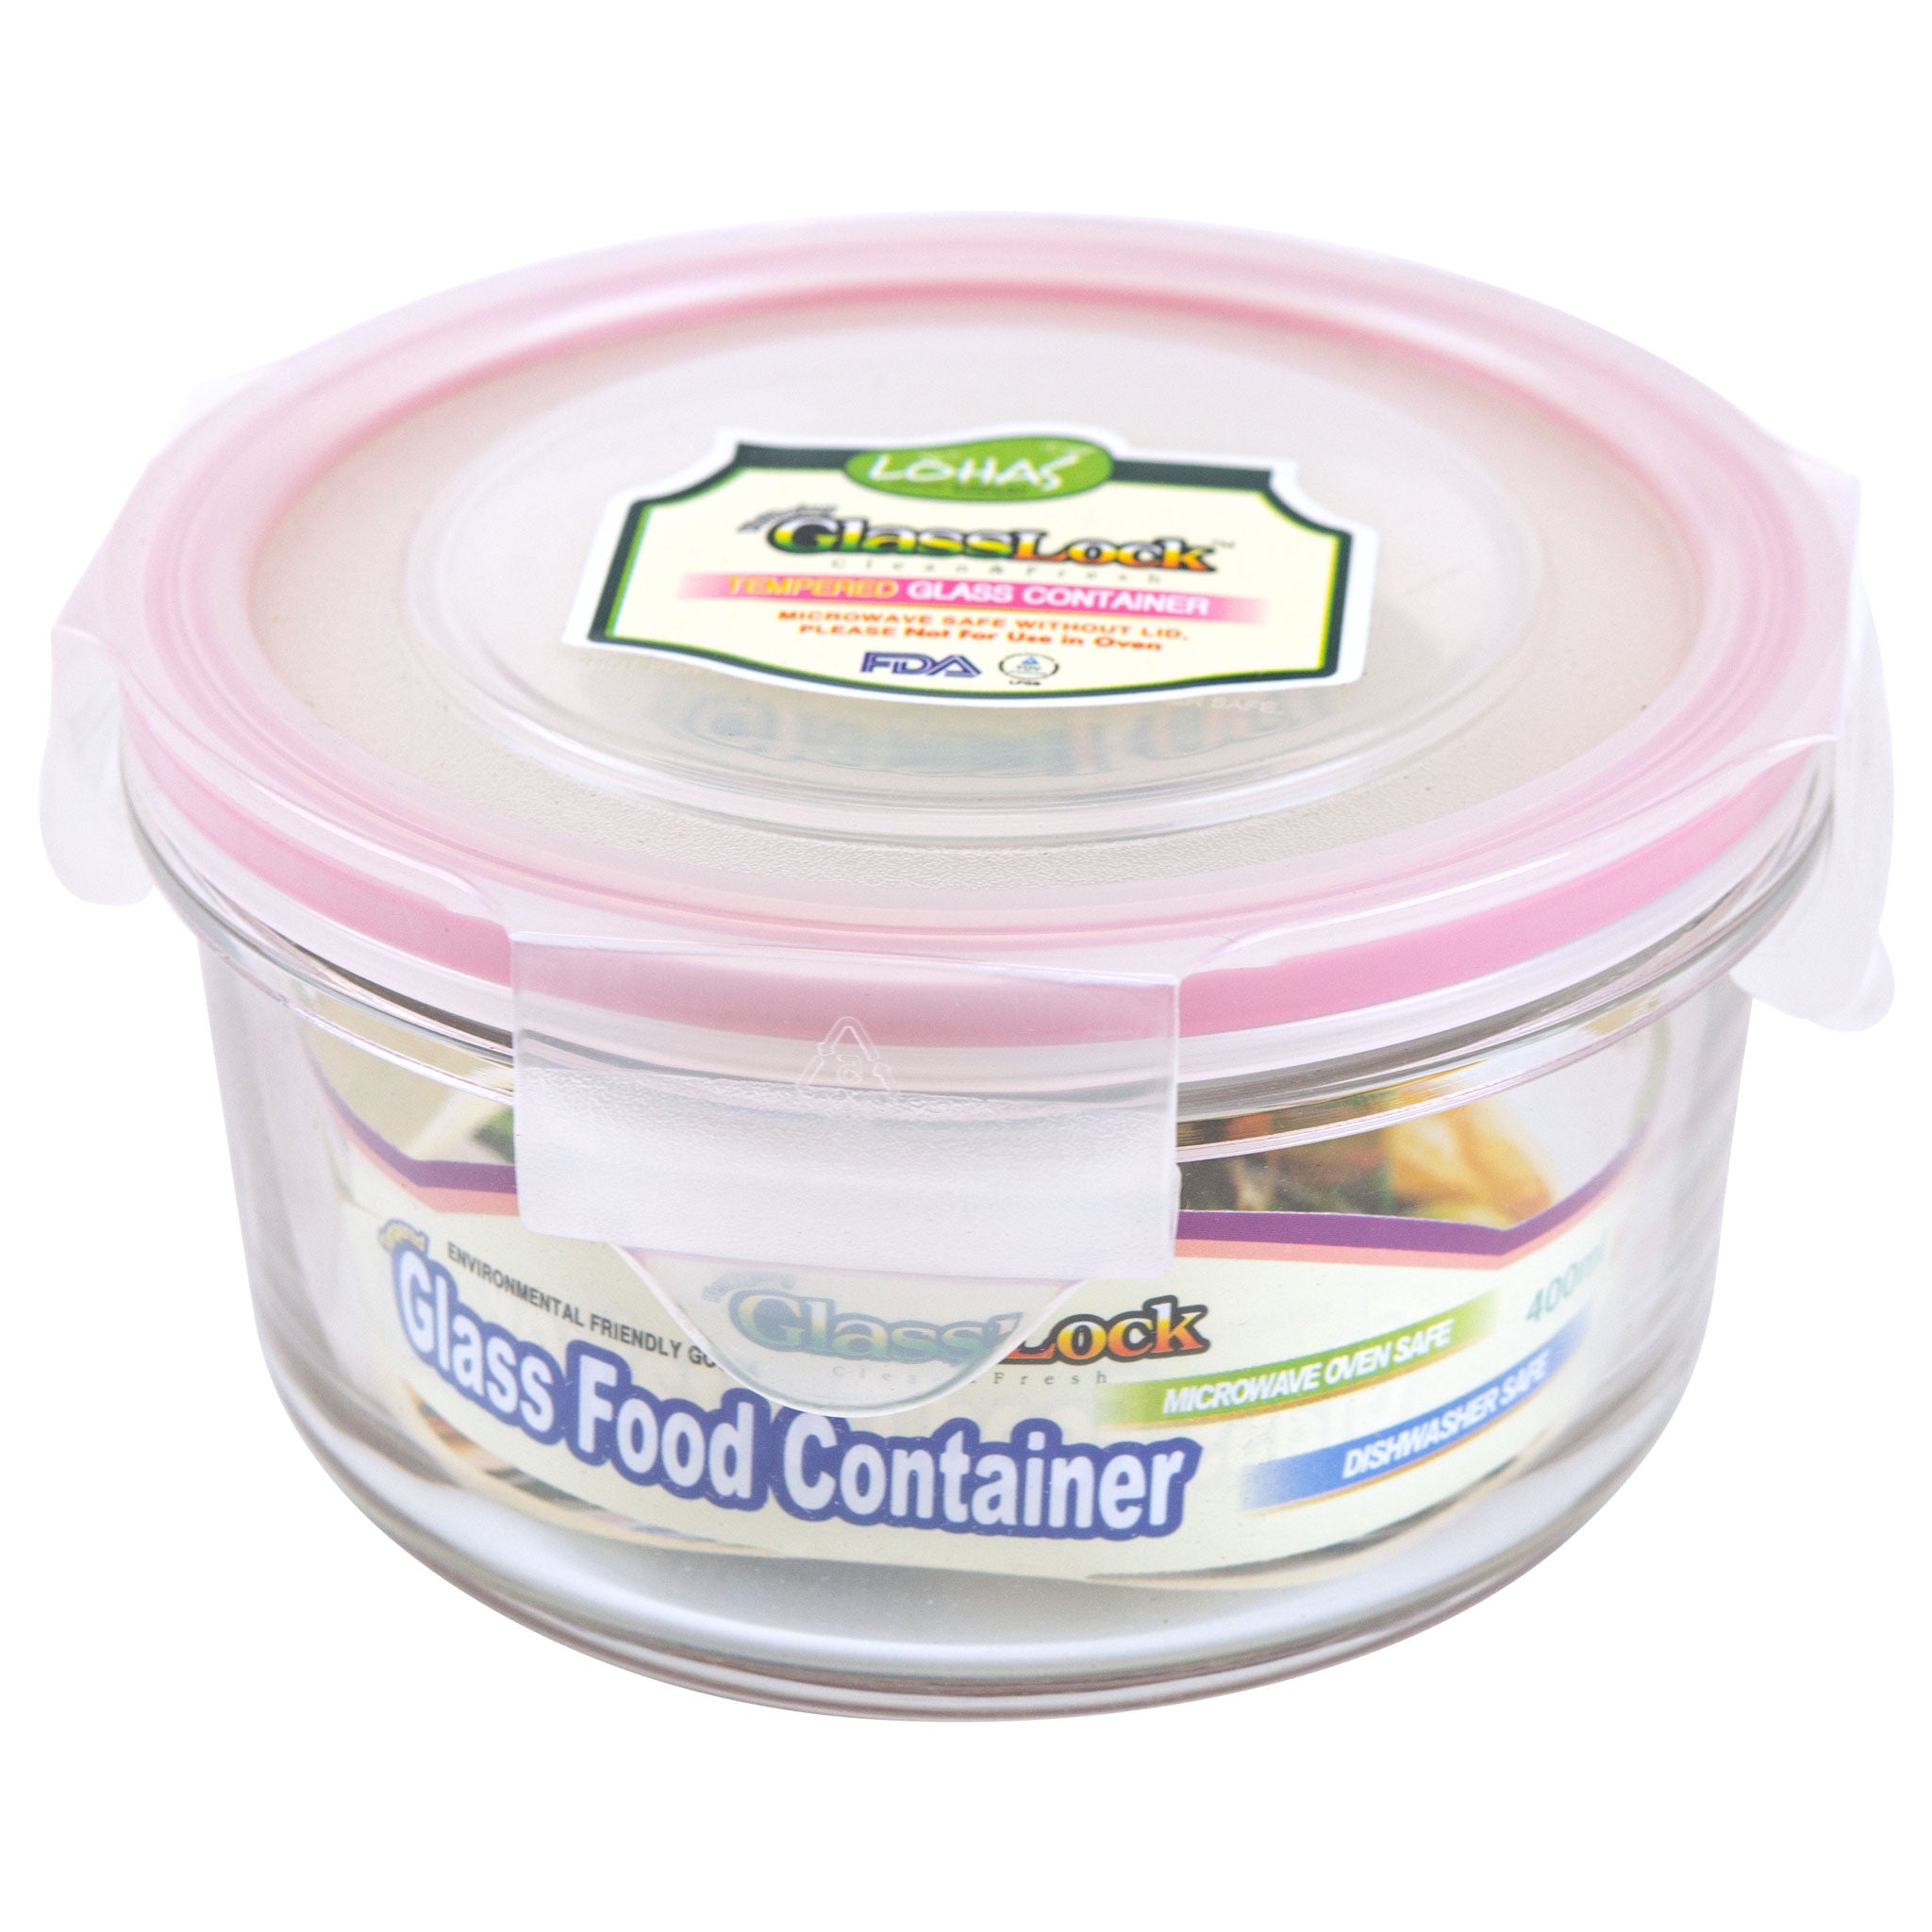 Round Food Storage Container | Large